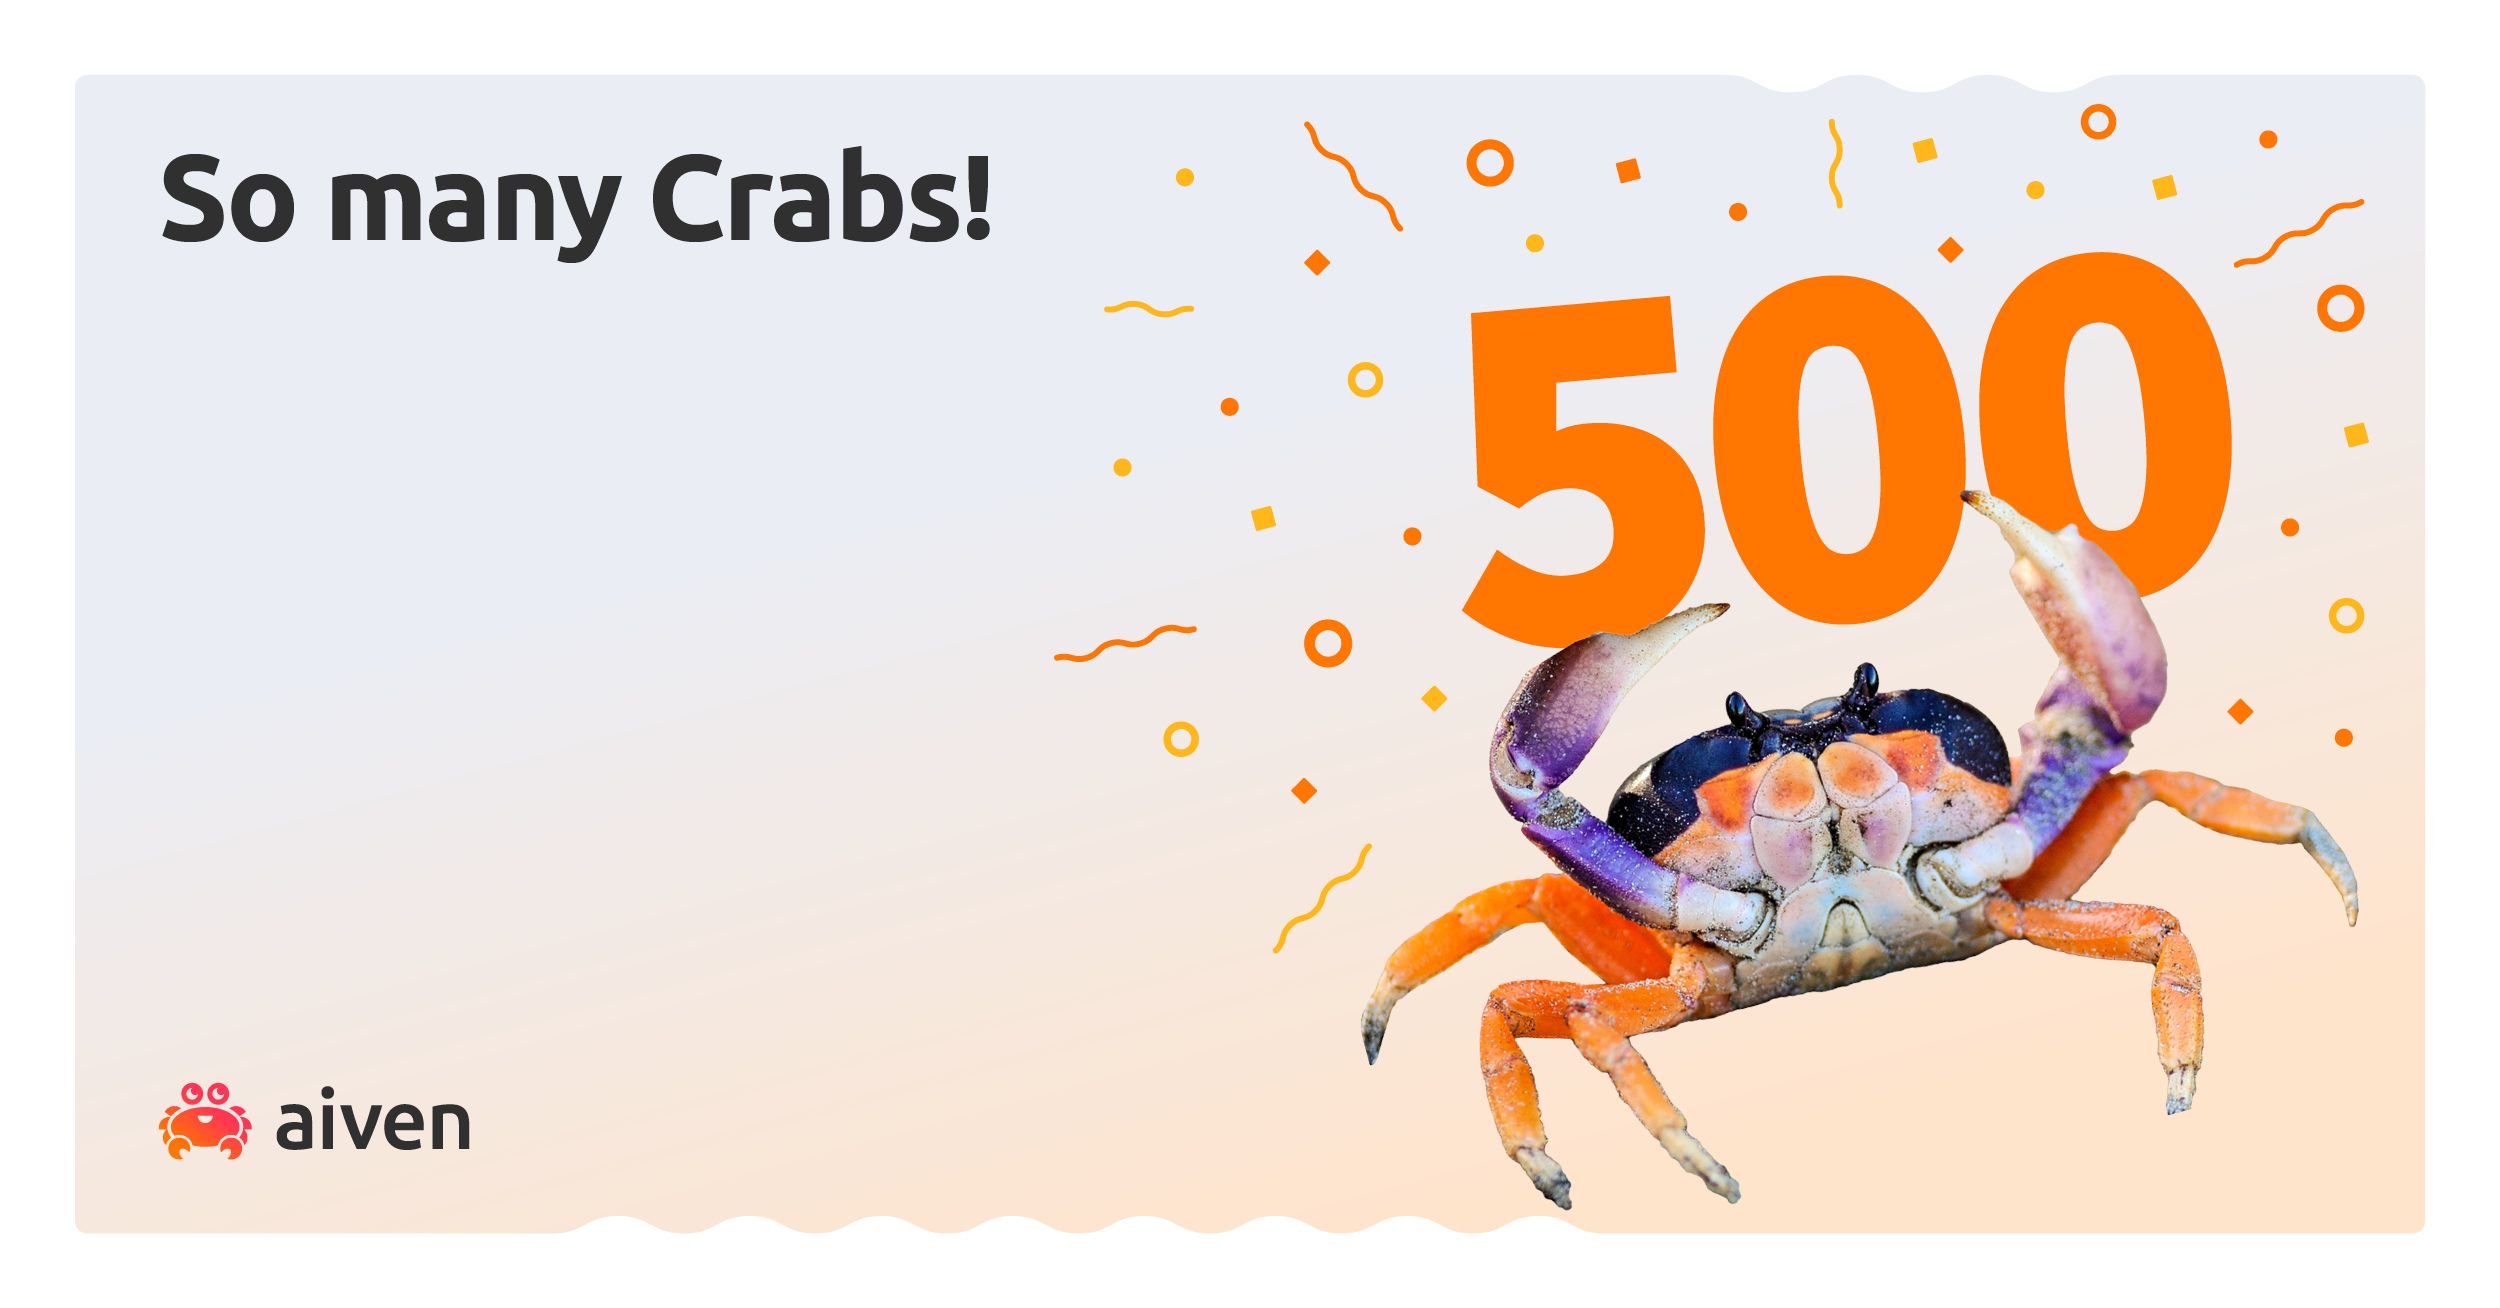 In the company of fabulous Crabs illustration